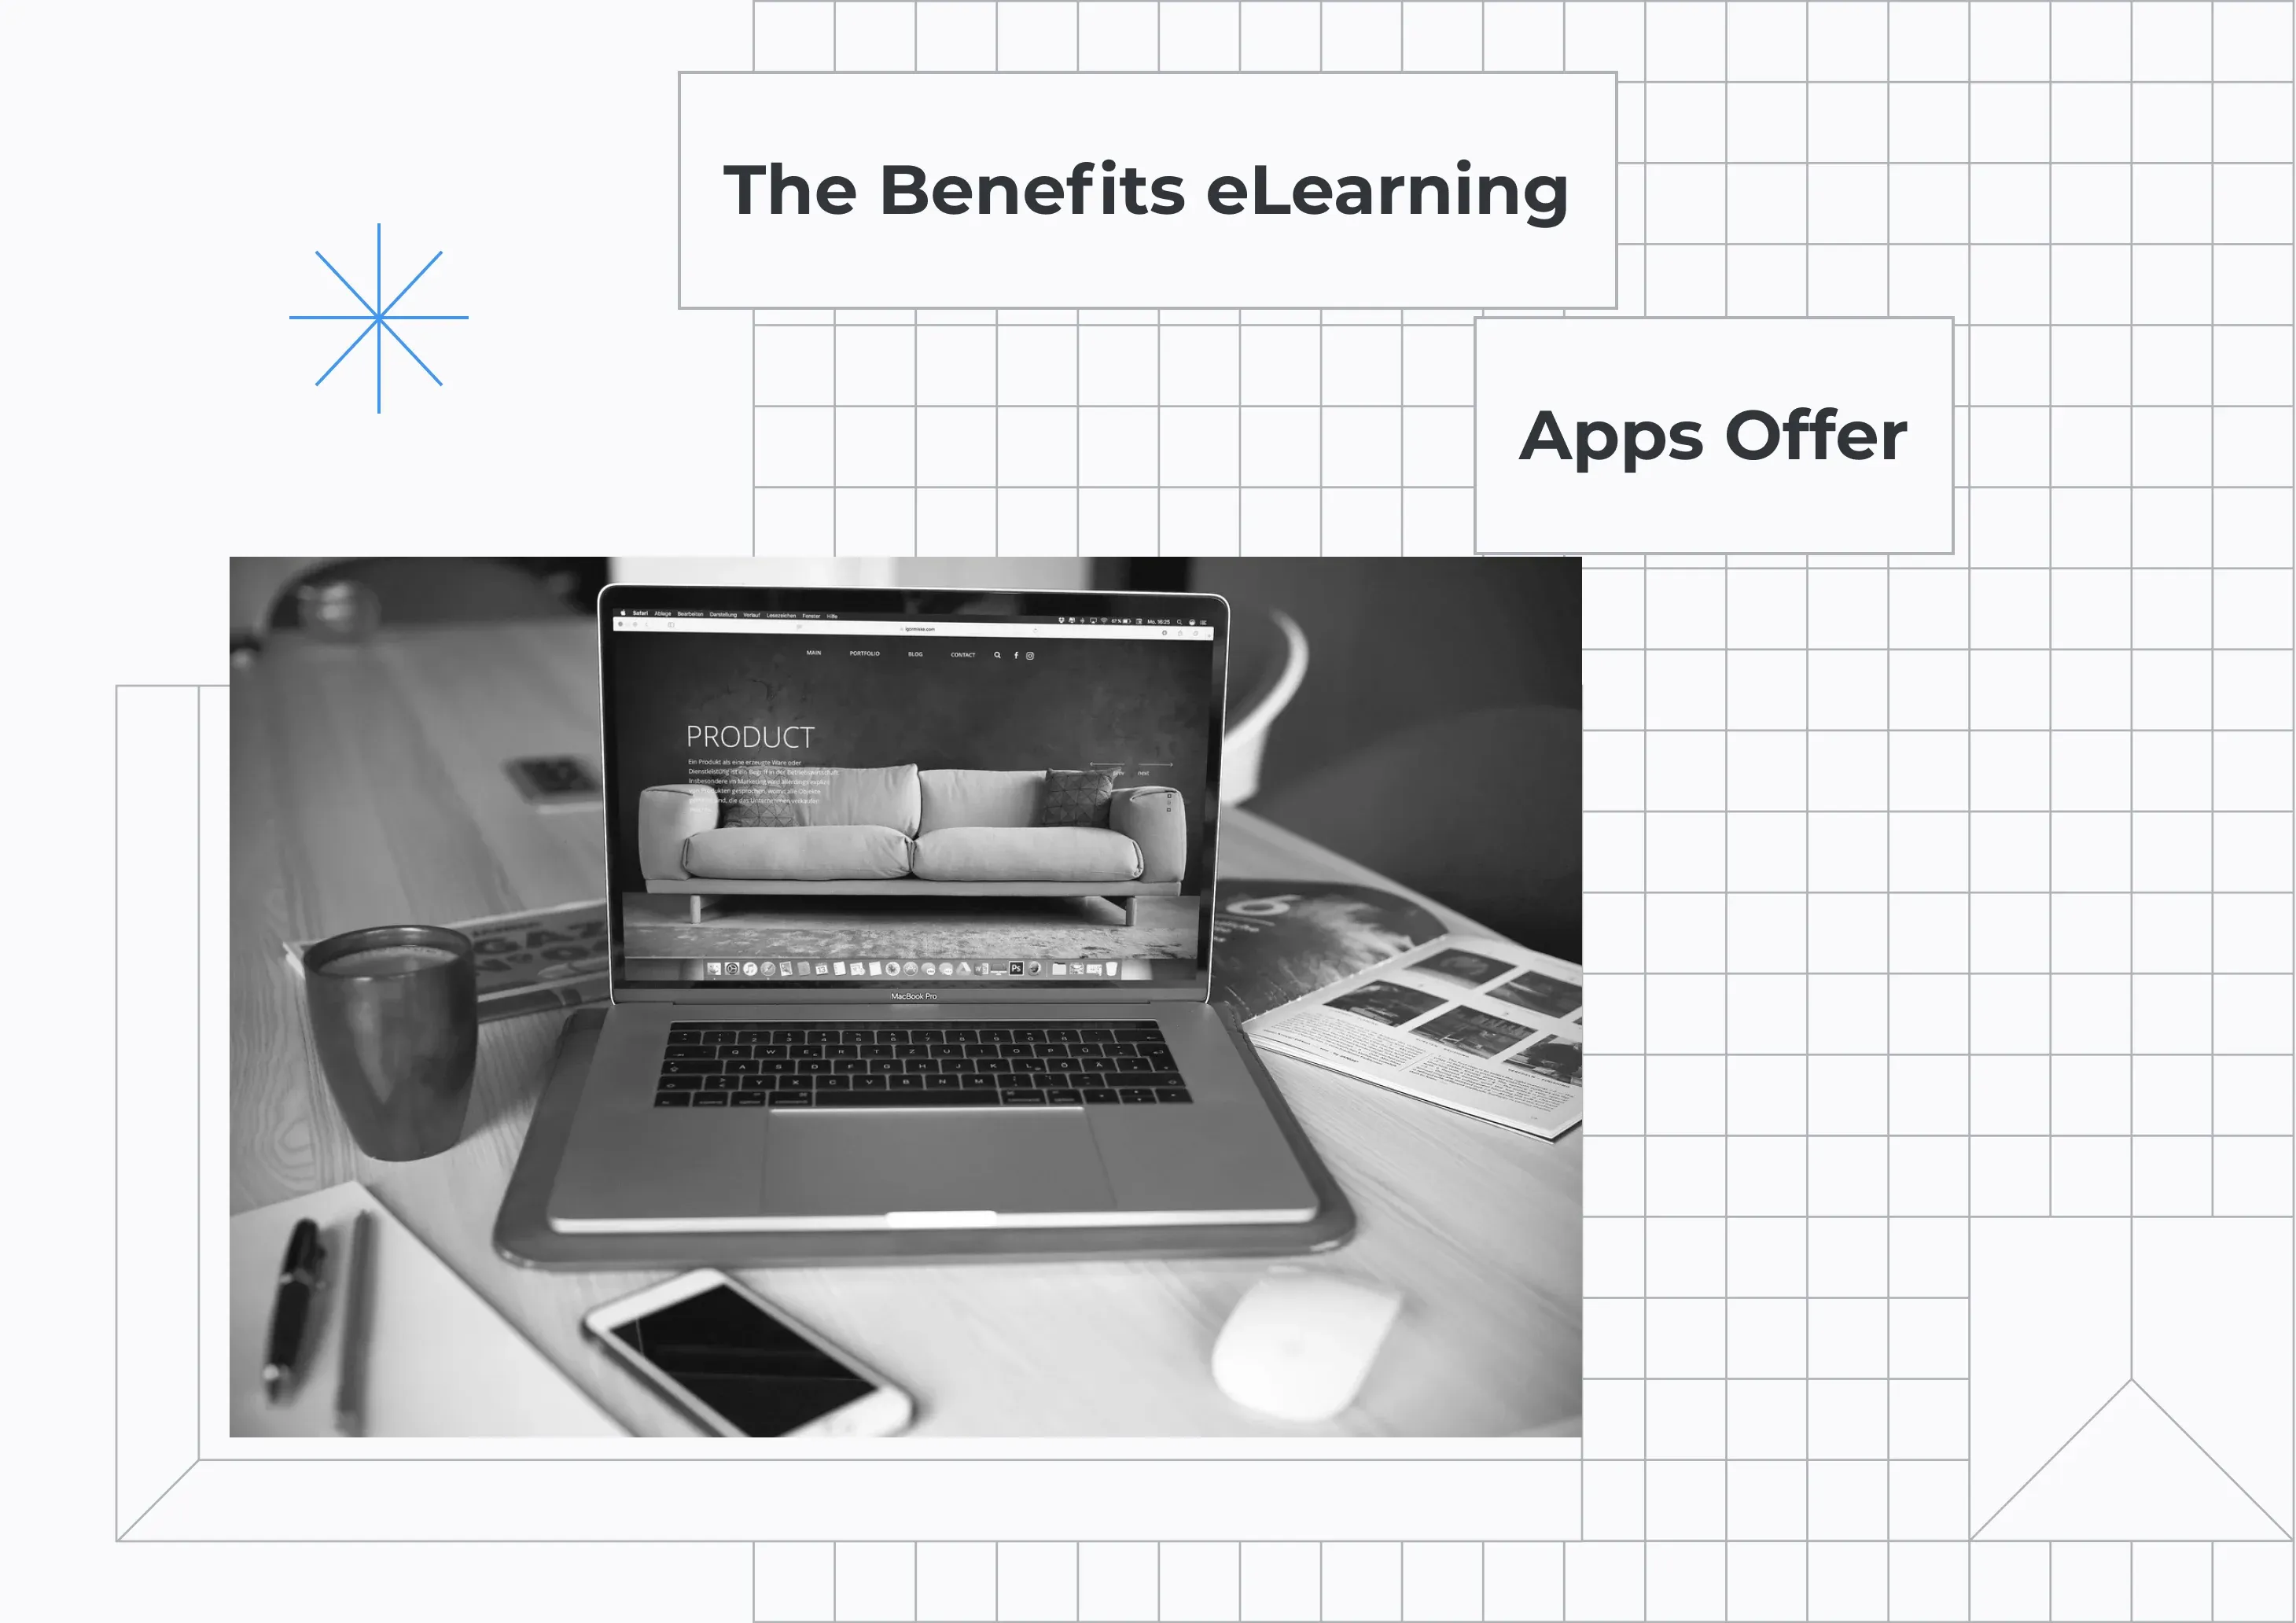 The Benefits eLearning Apps Offer